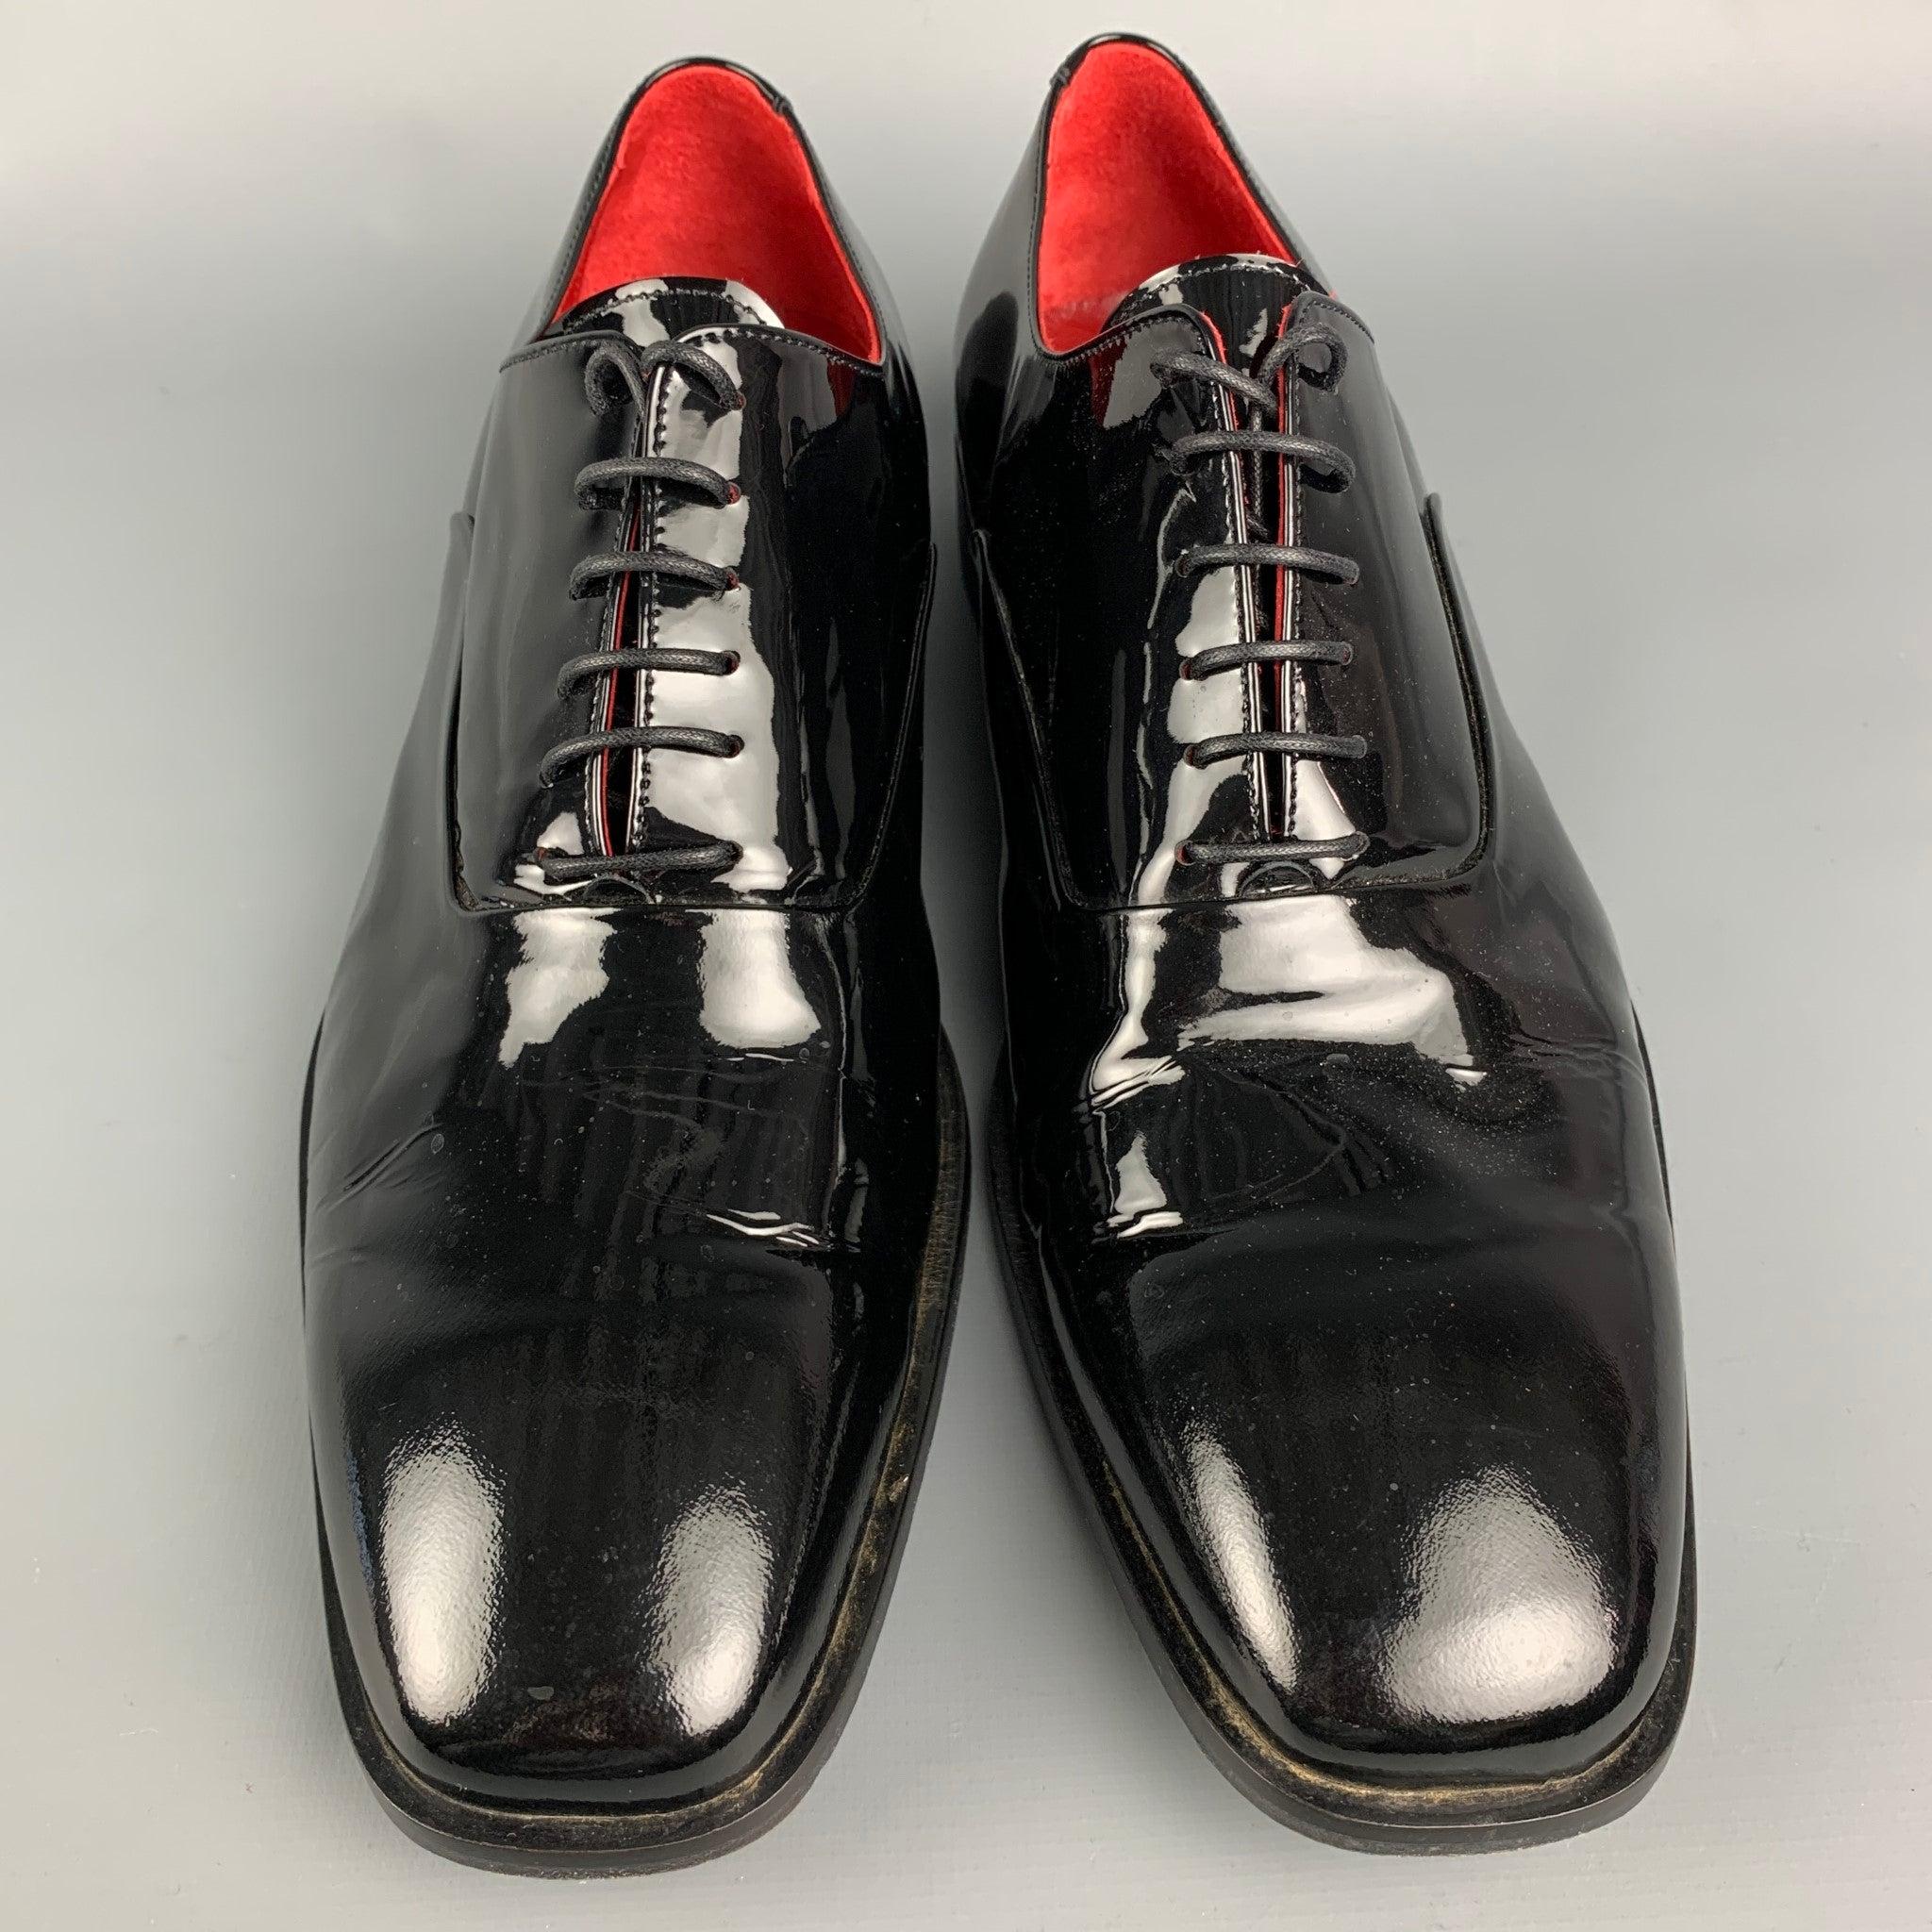 Men's BARNEY'S NEW YORK Size 12 Black Patent Leather Lace Up Shoes